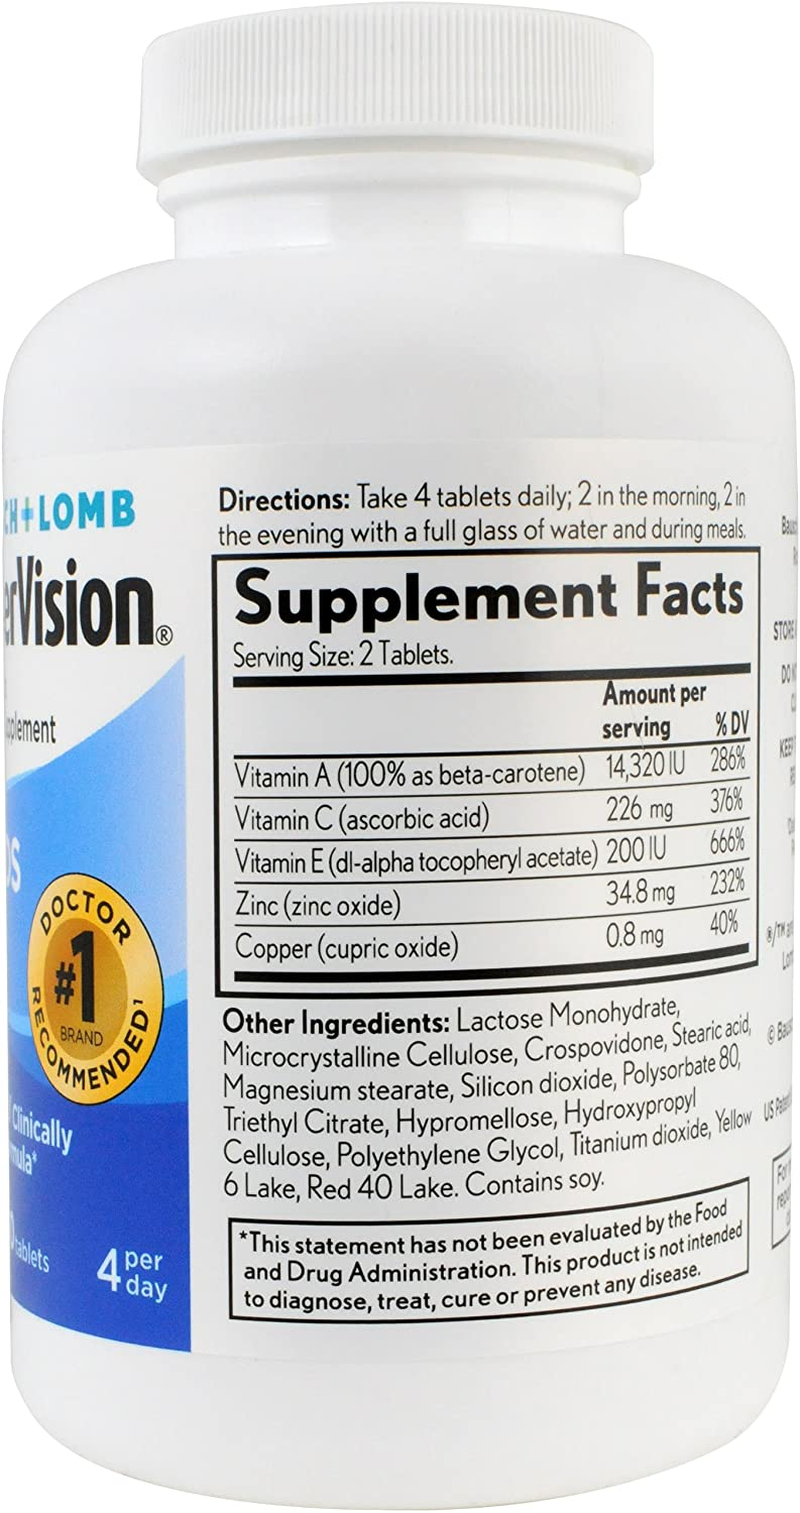 B&L Preservision AREDS Eye Vitamin & Mineral Supplement Tablets - 240 Count Bottle